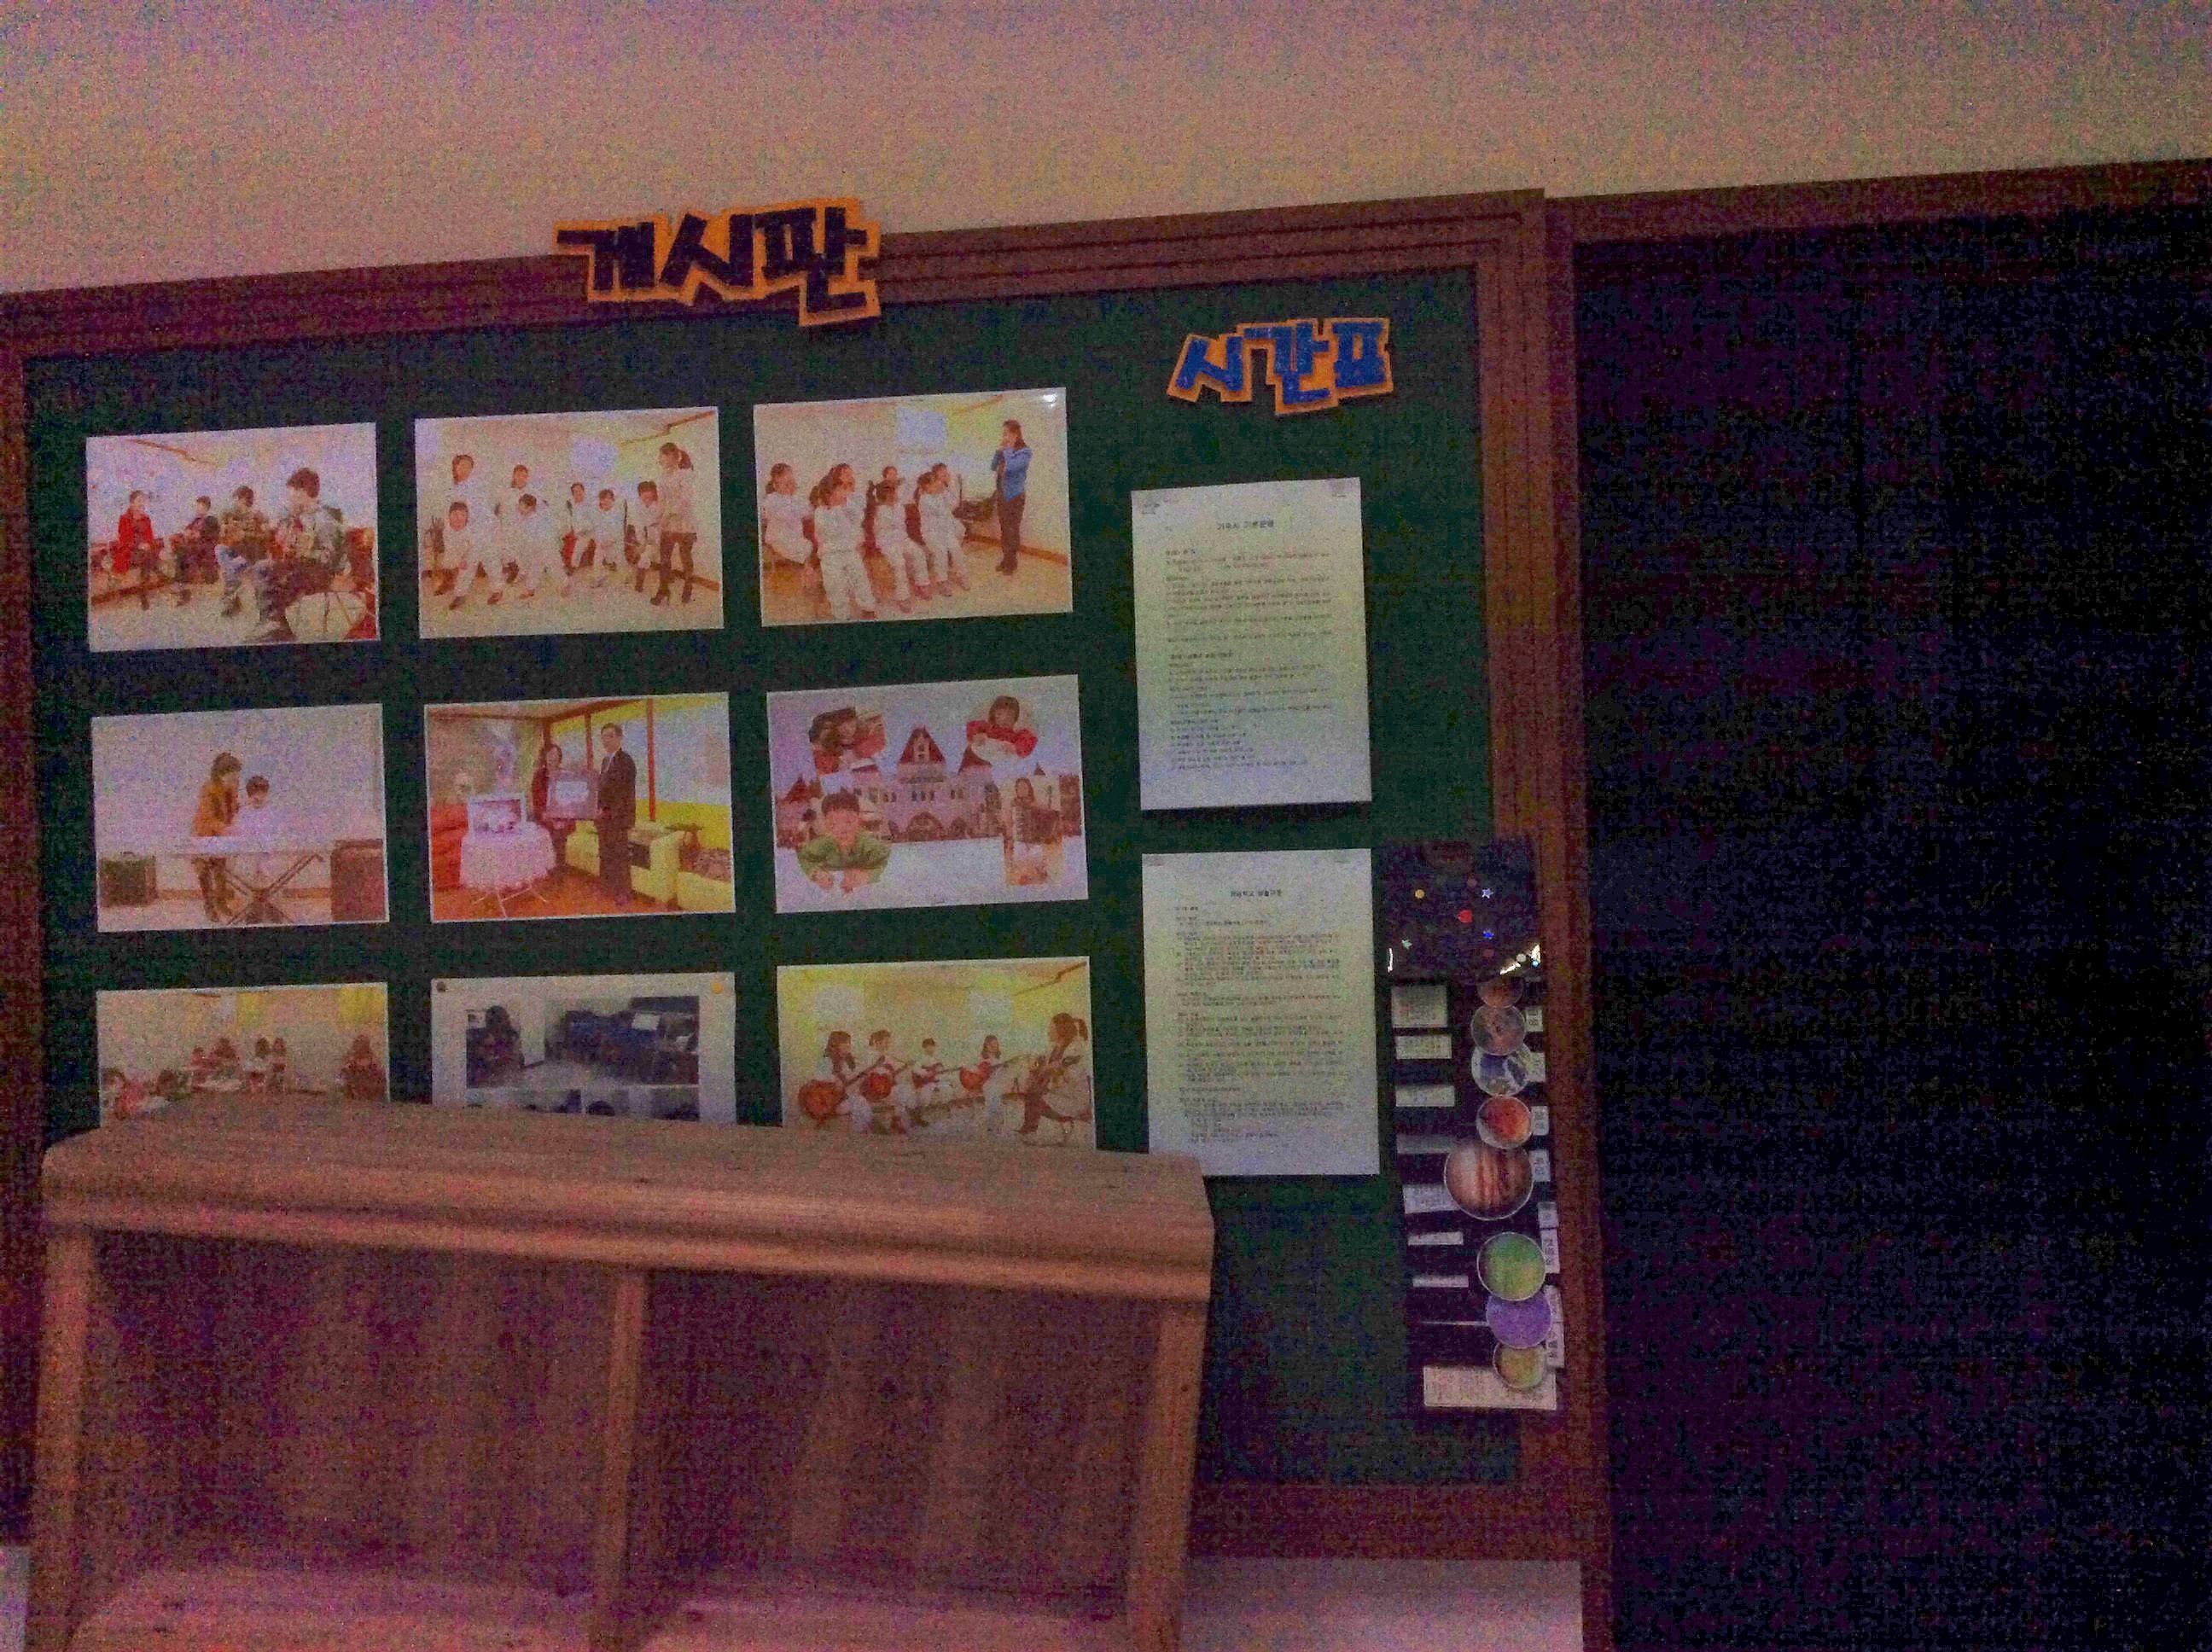 A small classroom of an afterschool program provided by a foundation for North Korean defector mothers' children.